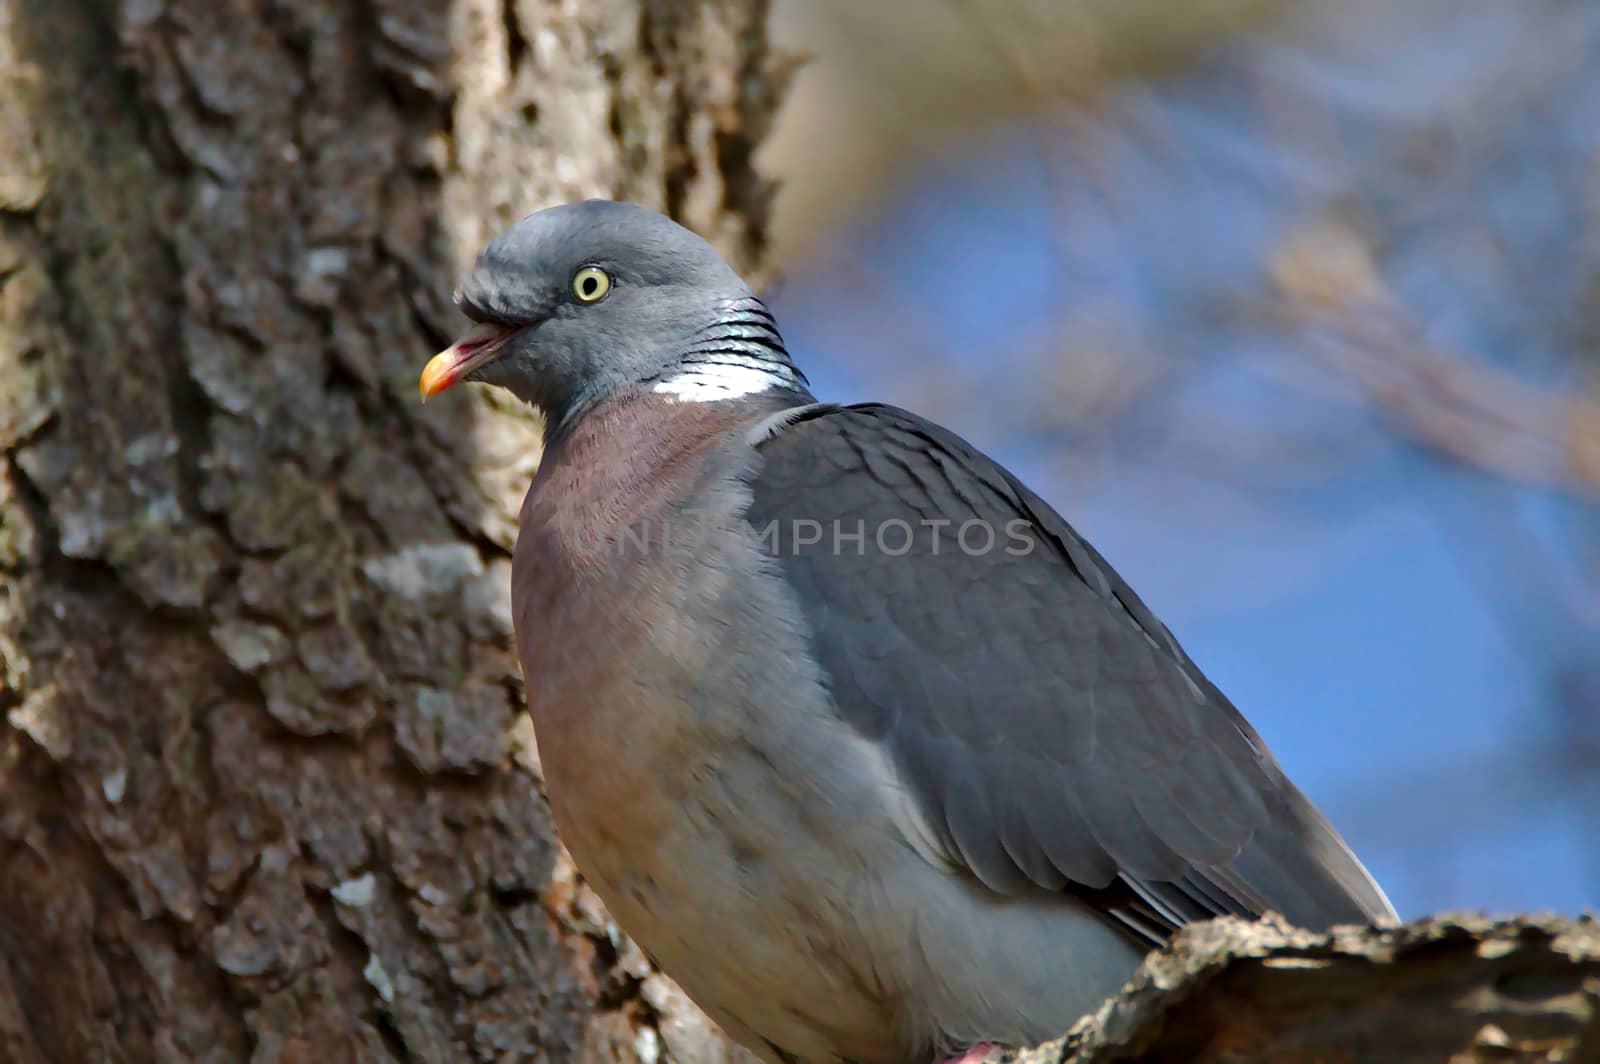 Wild wood pigeon sitting on a tree. Upper half of the body visible.